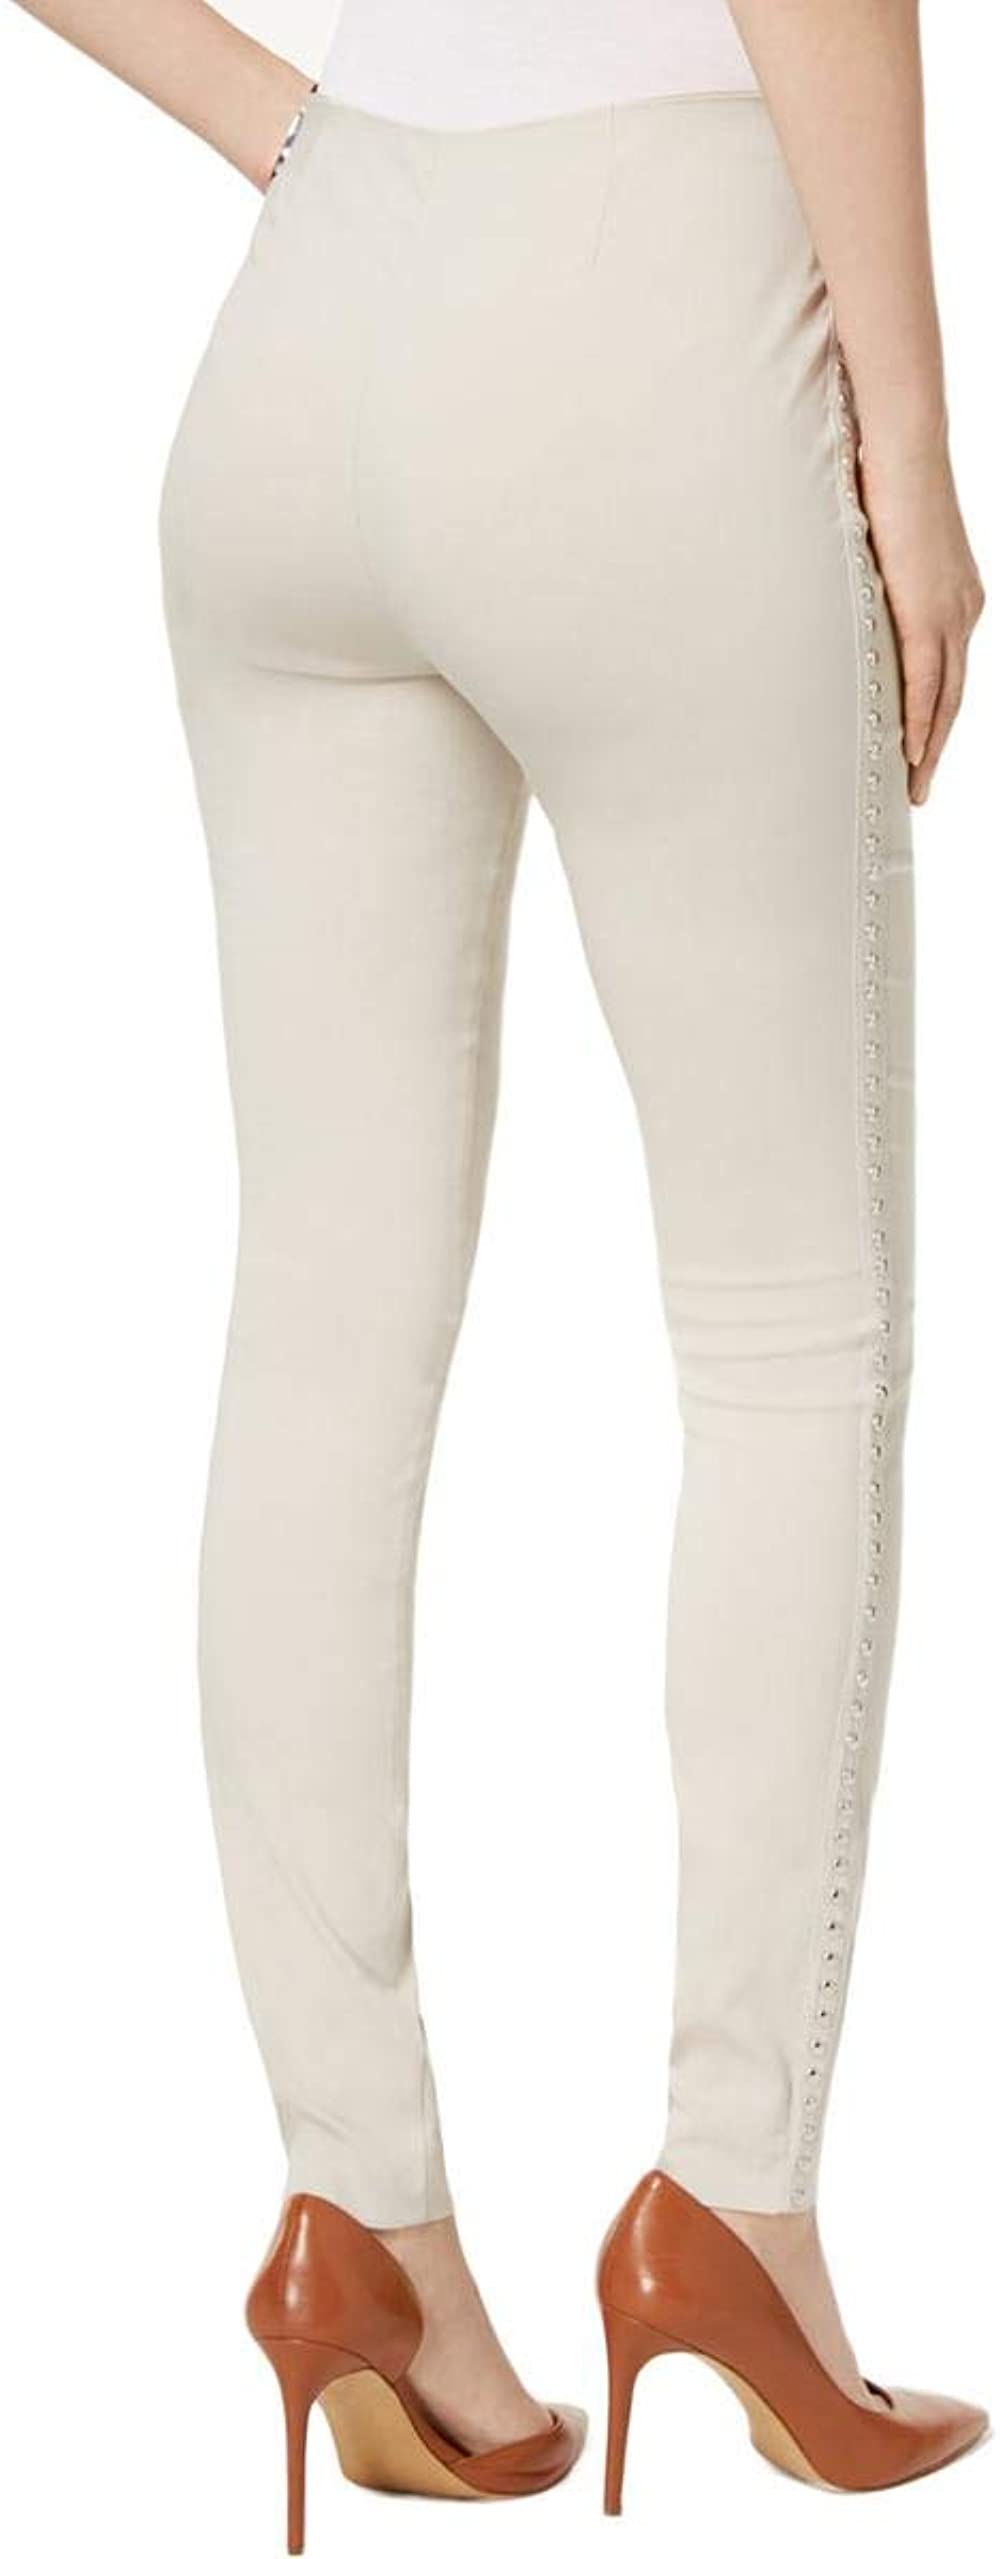 INC International Concepts Womens Studded Pull On Skinny Pants